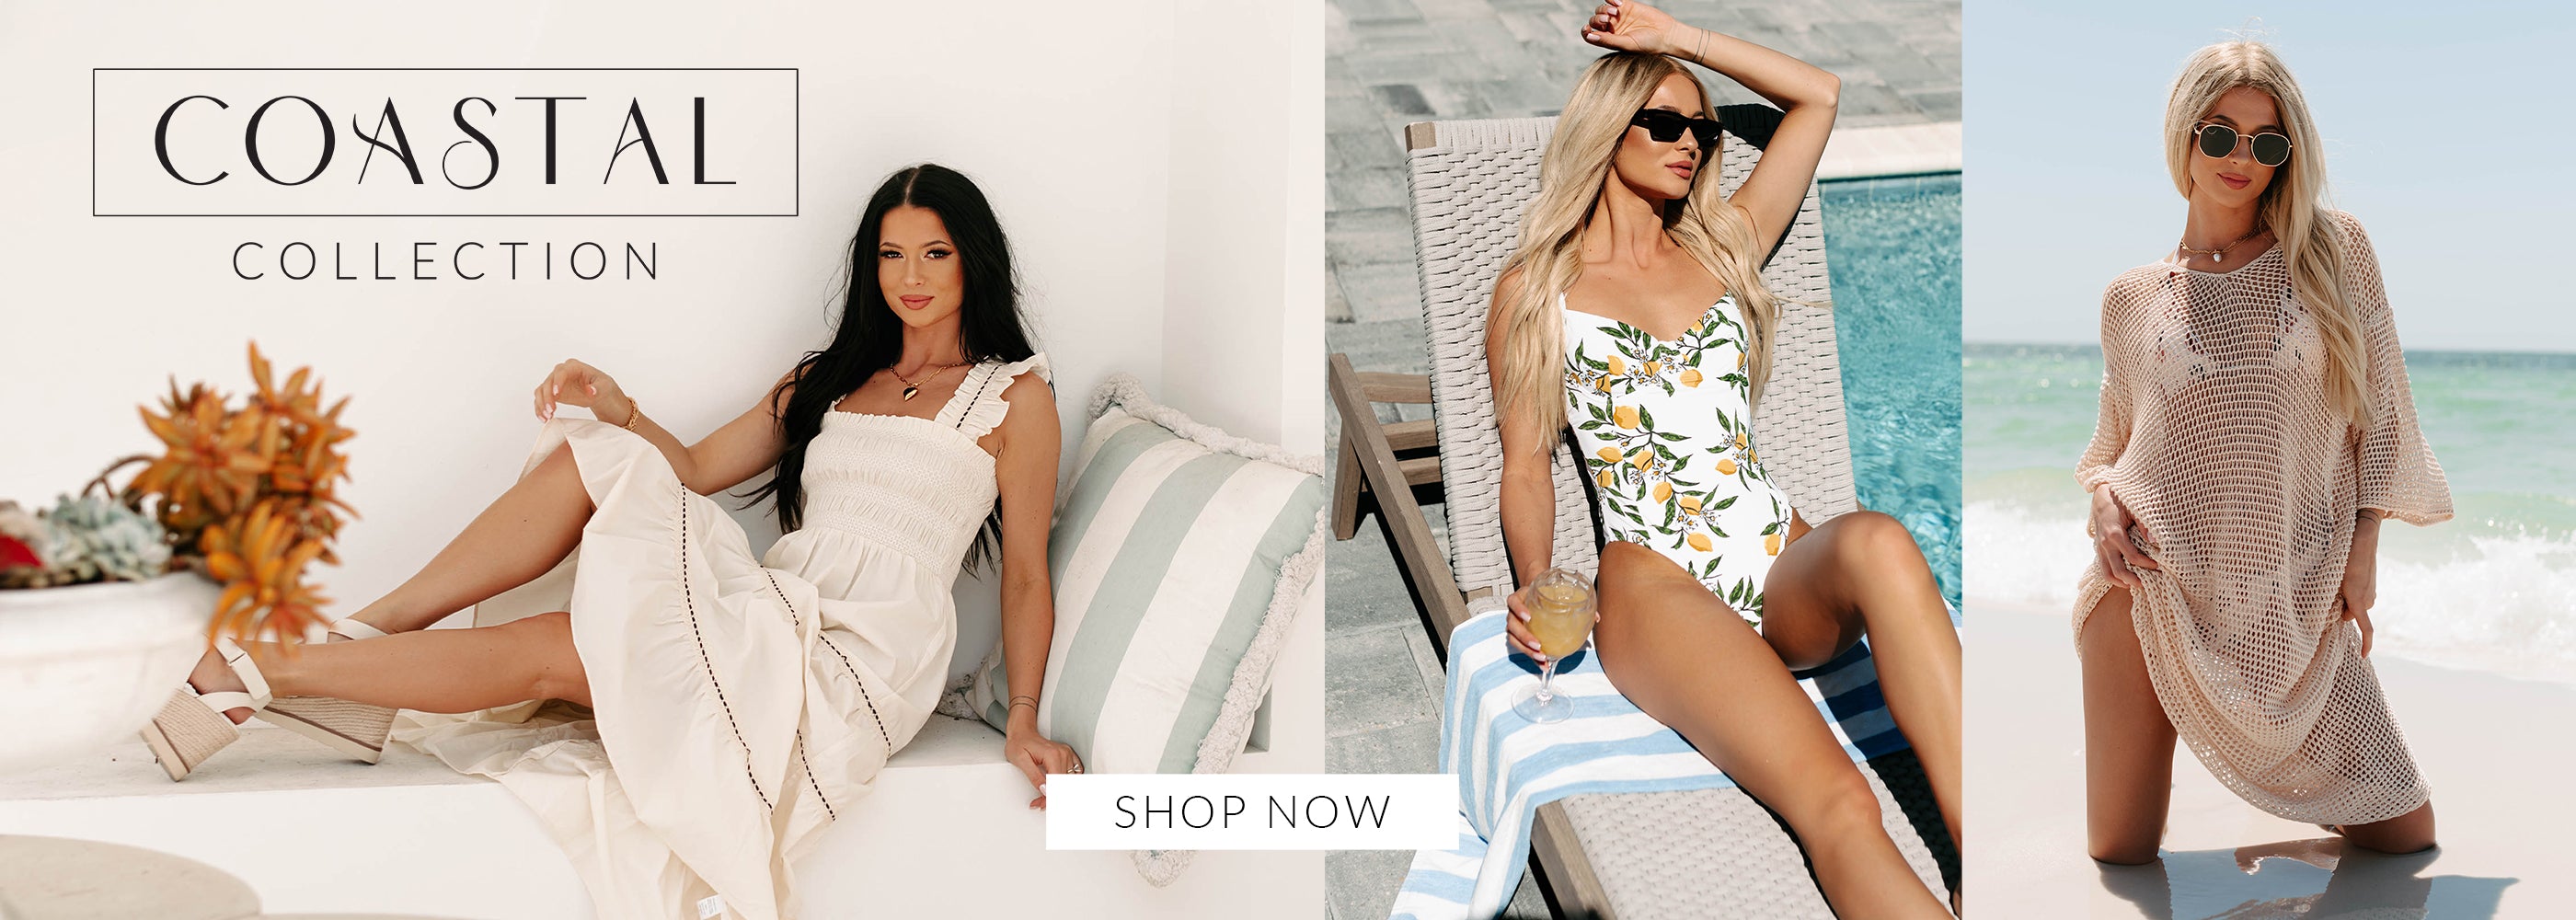 Collage of models wearing vacay dresses, lemon swimsuits and beach covers. Headline says "Coastal Collection". Call to action says "Shop Now" and links to the coastal collection.